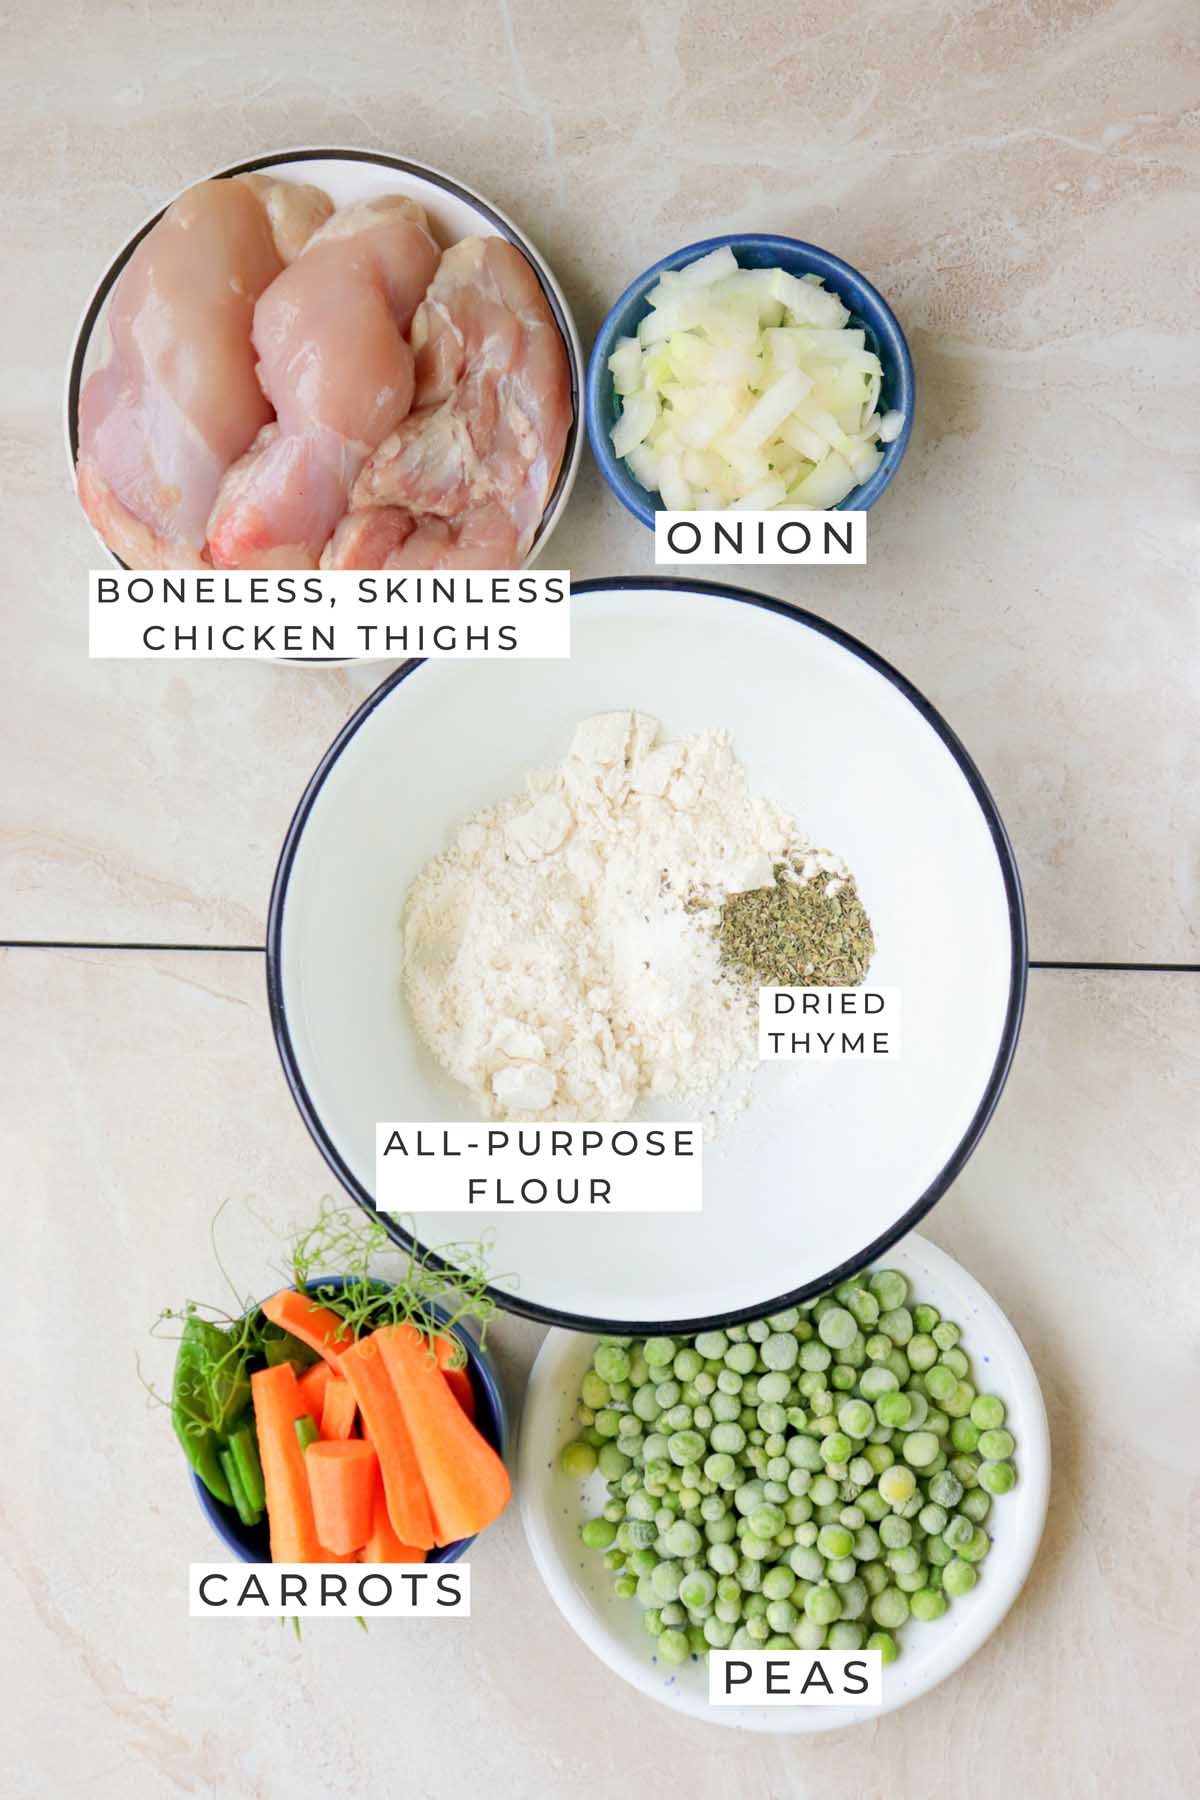 Labeled ingredients for the chicken stew.